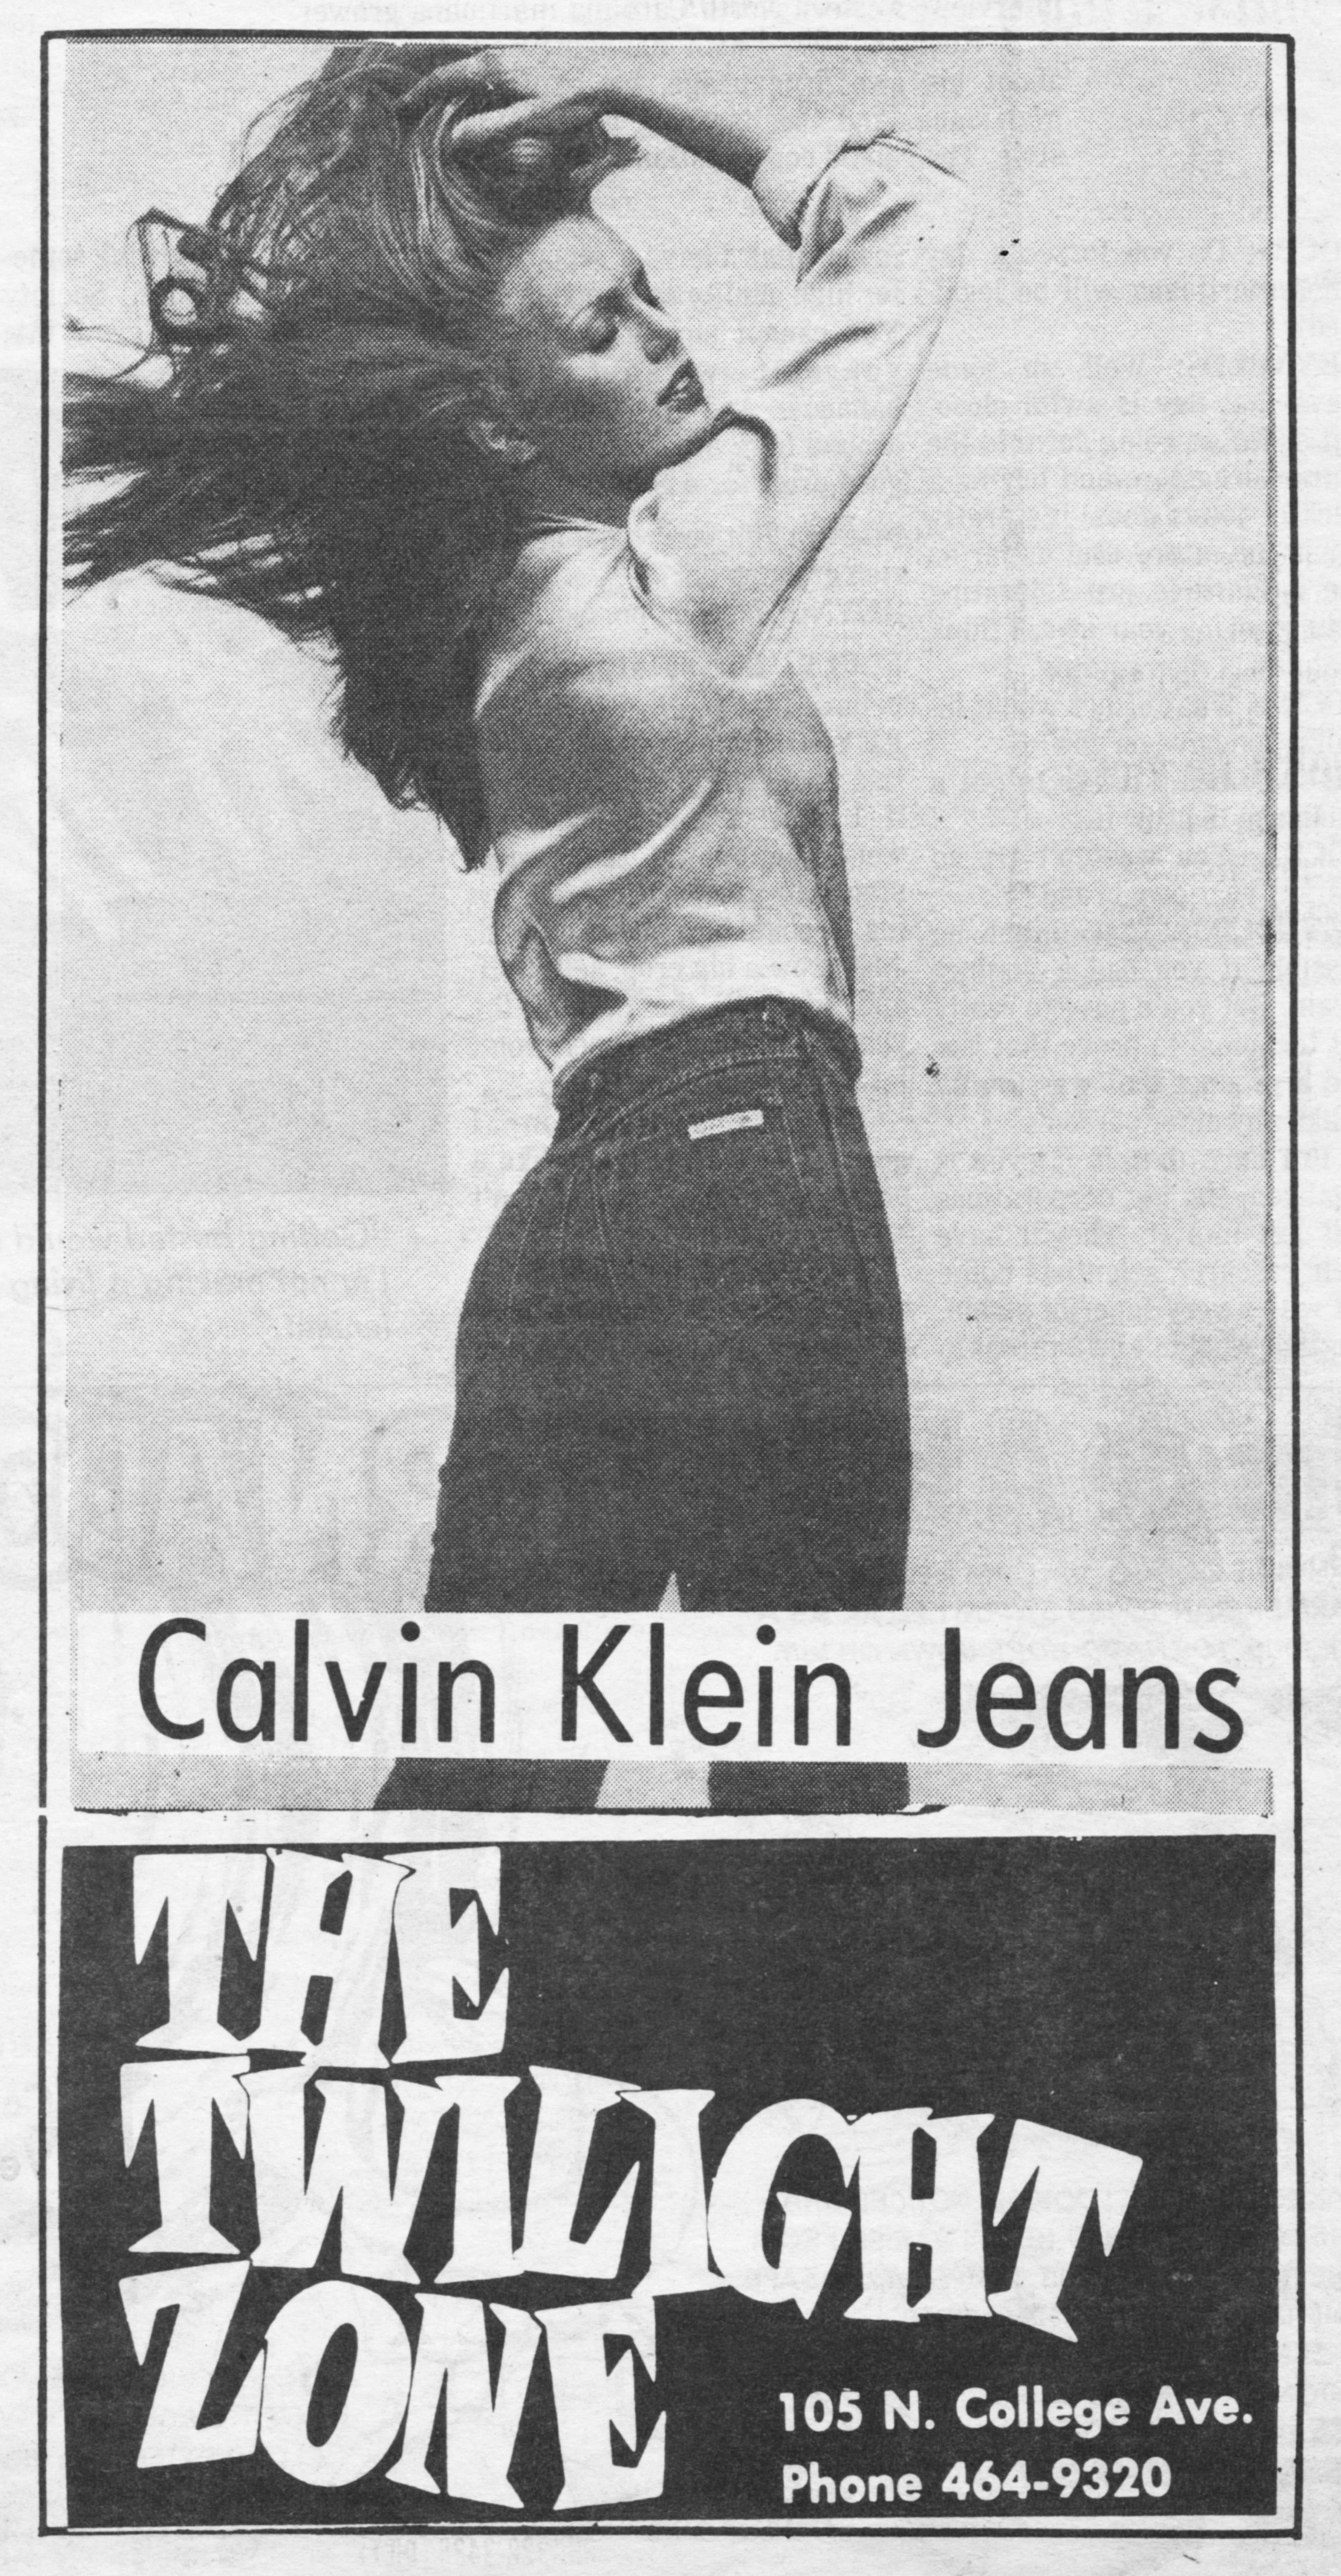 Advertisement for Calvin Klein Jeans and The Twilight Zone published October 4, 1979.